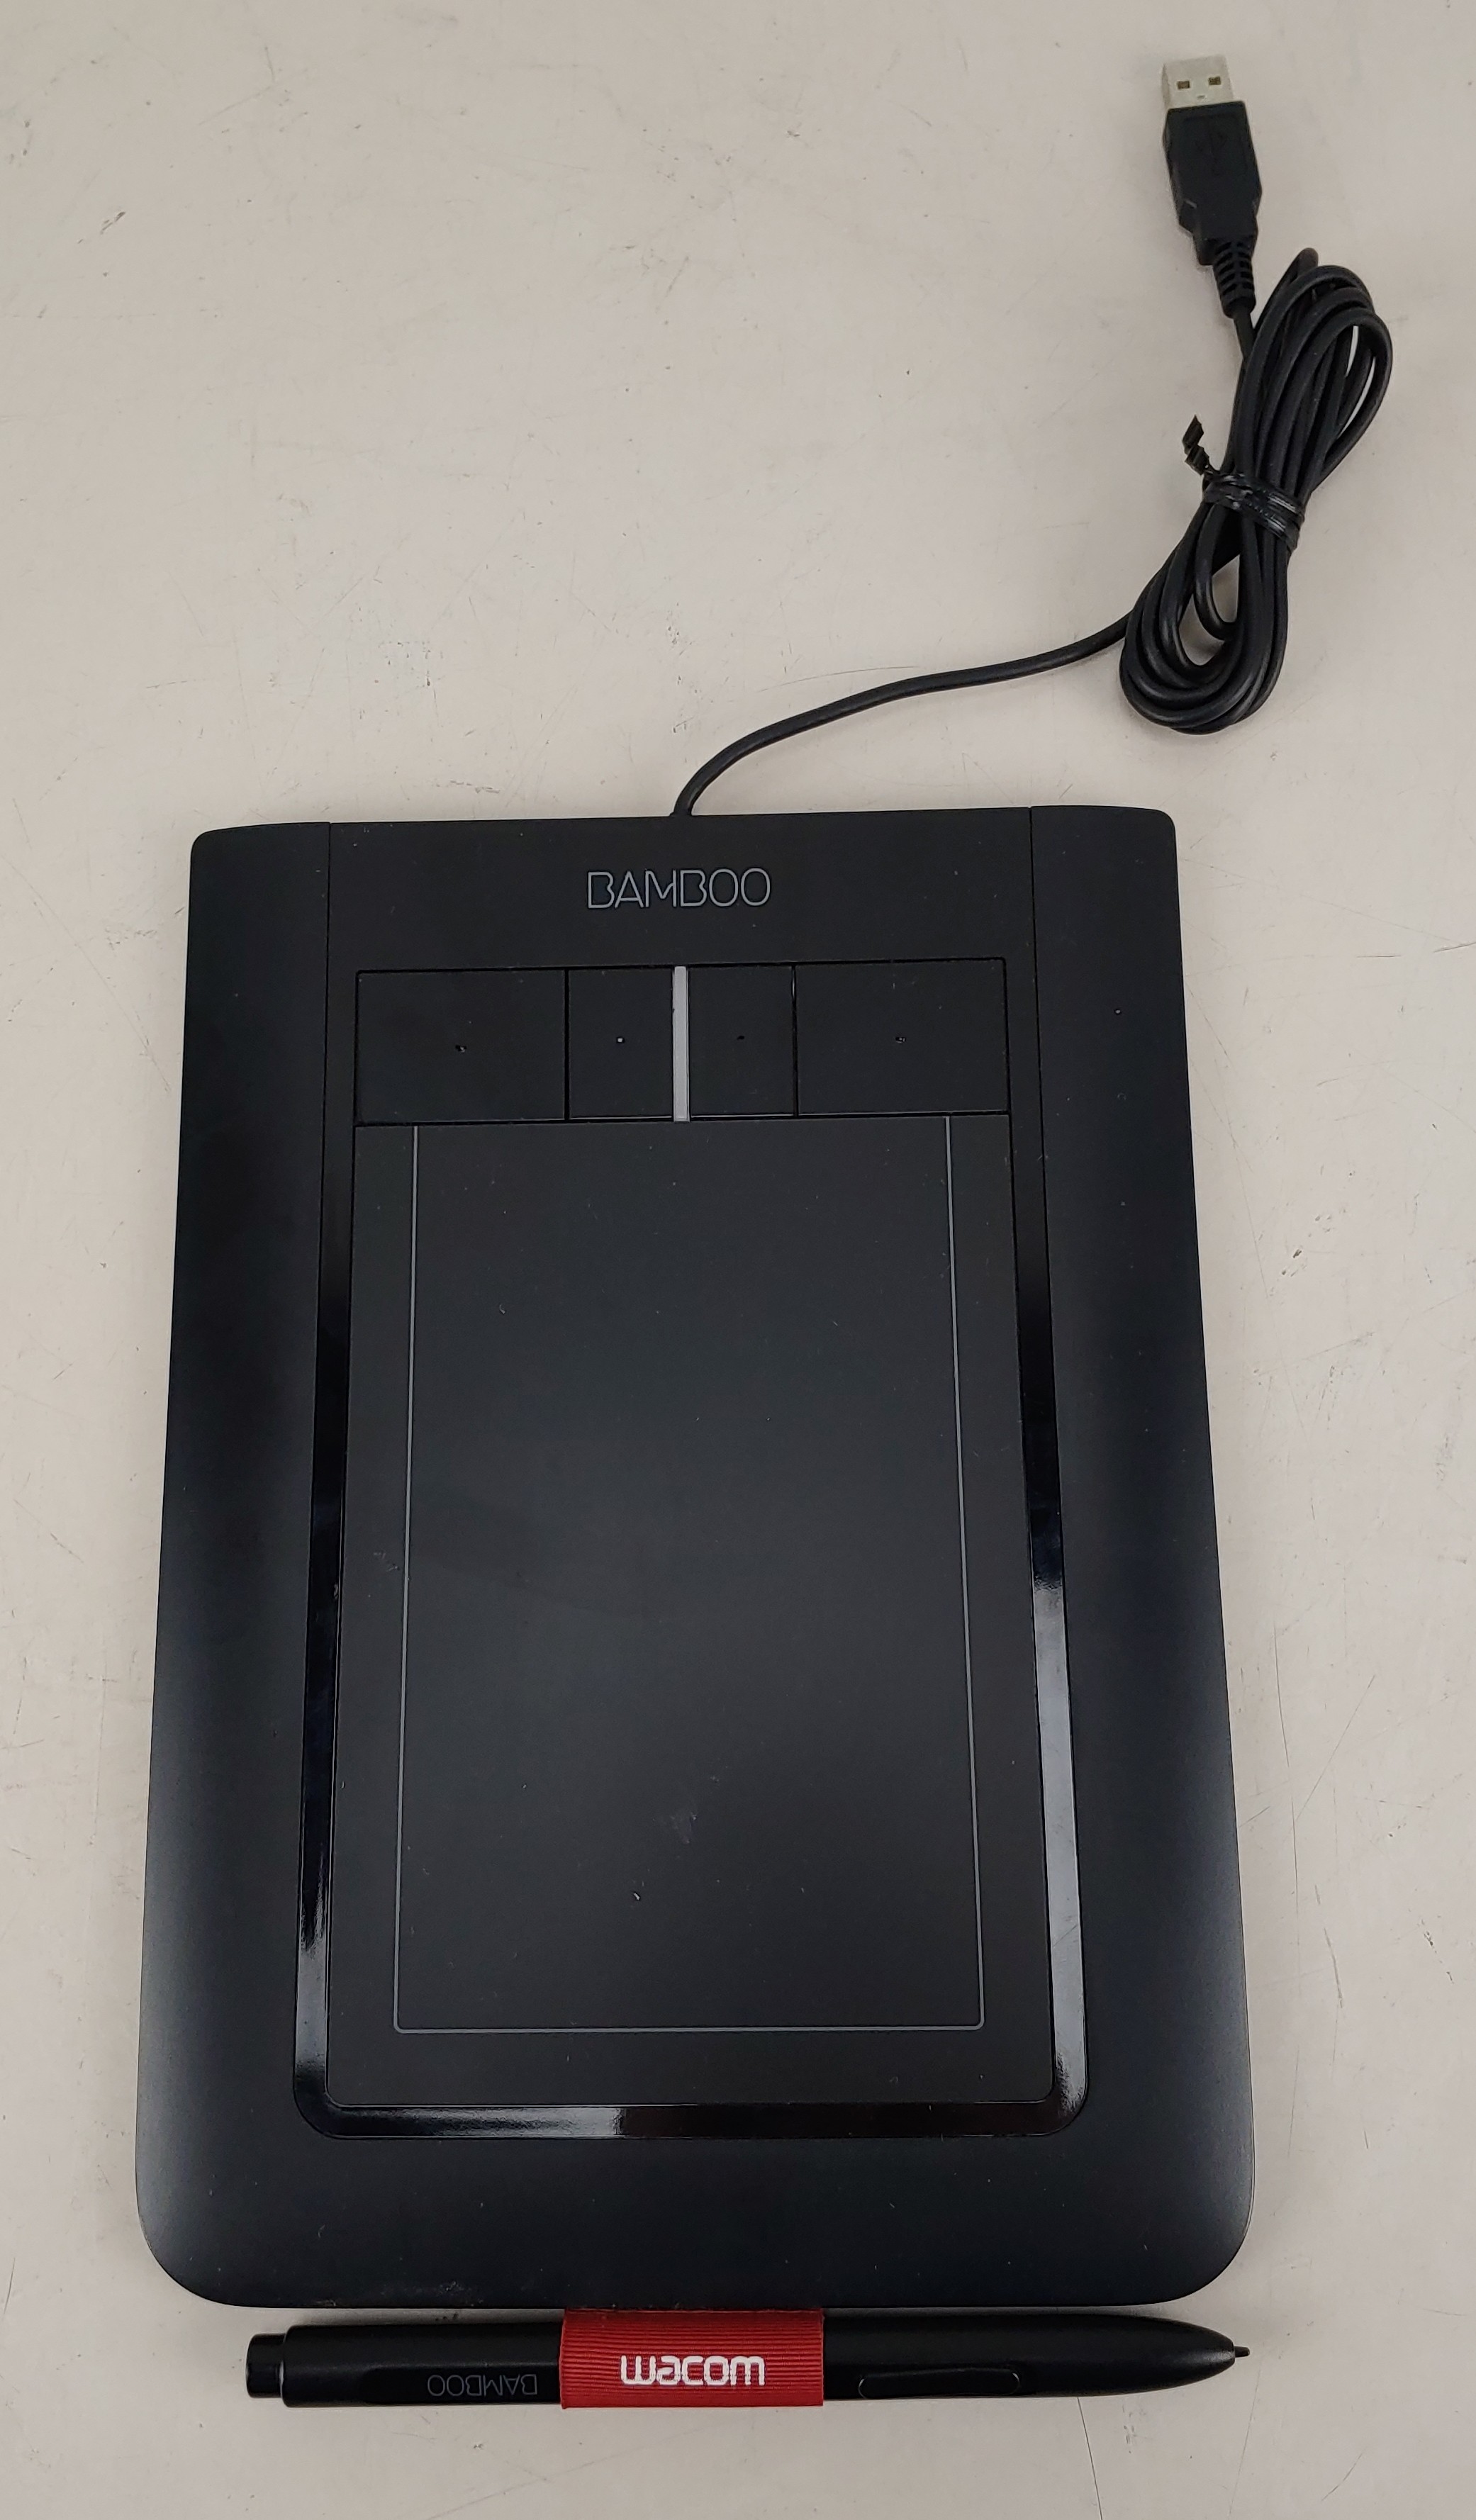 WACOM CTH-460 Bamboo Pen and Touch Graphics Tablet